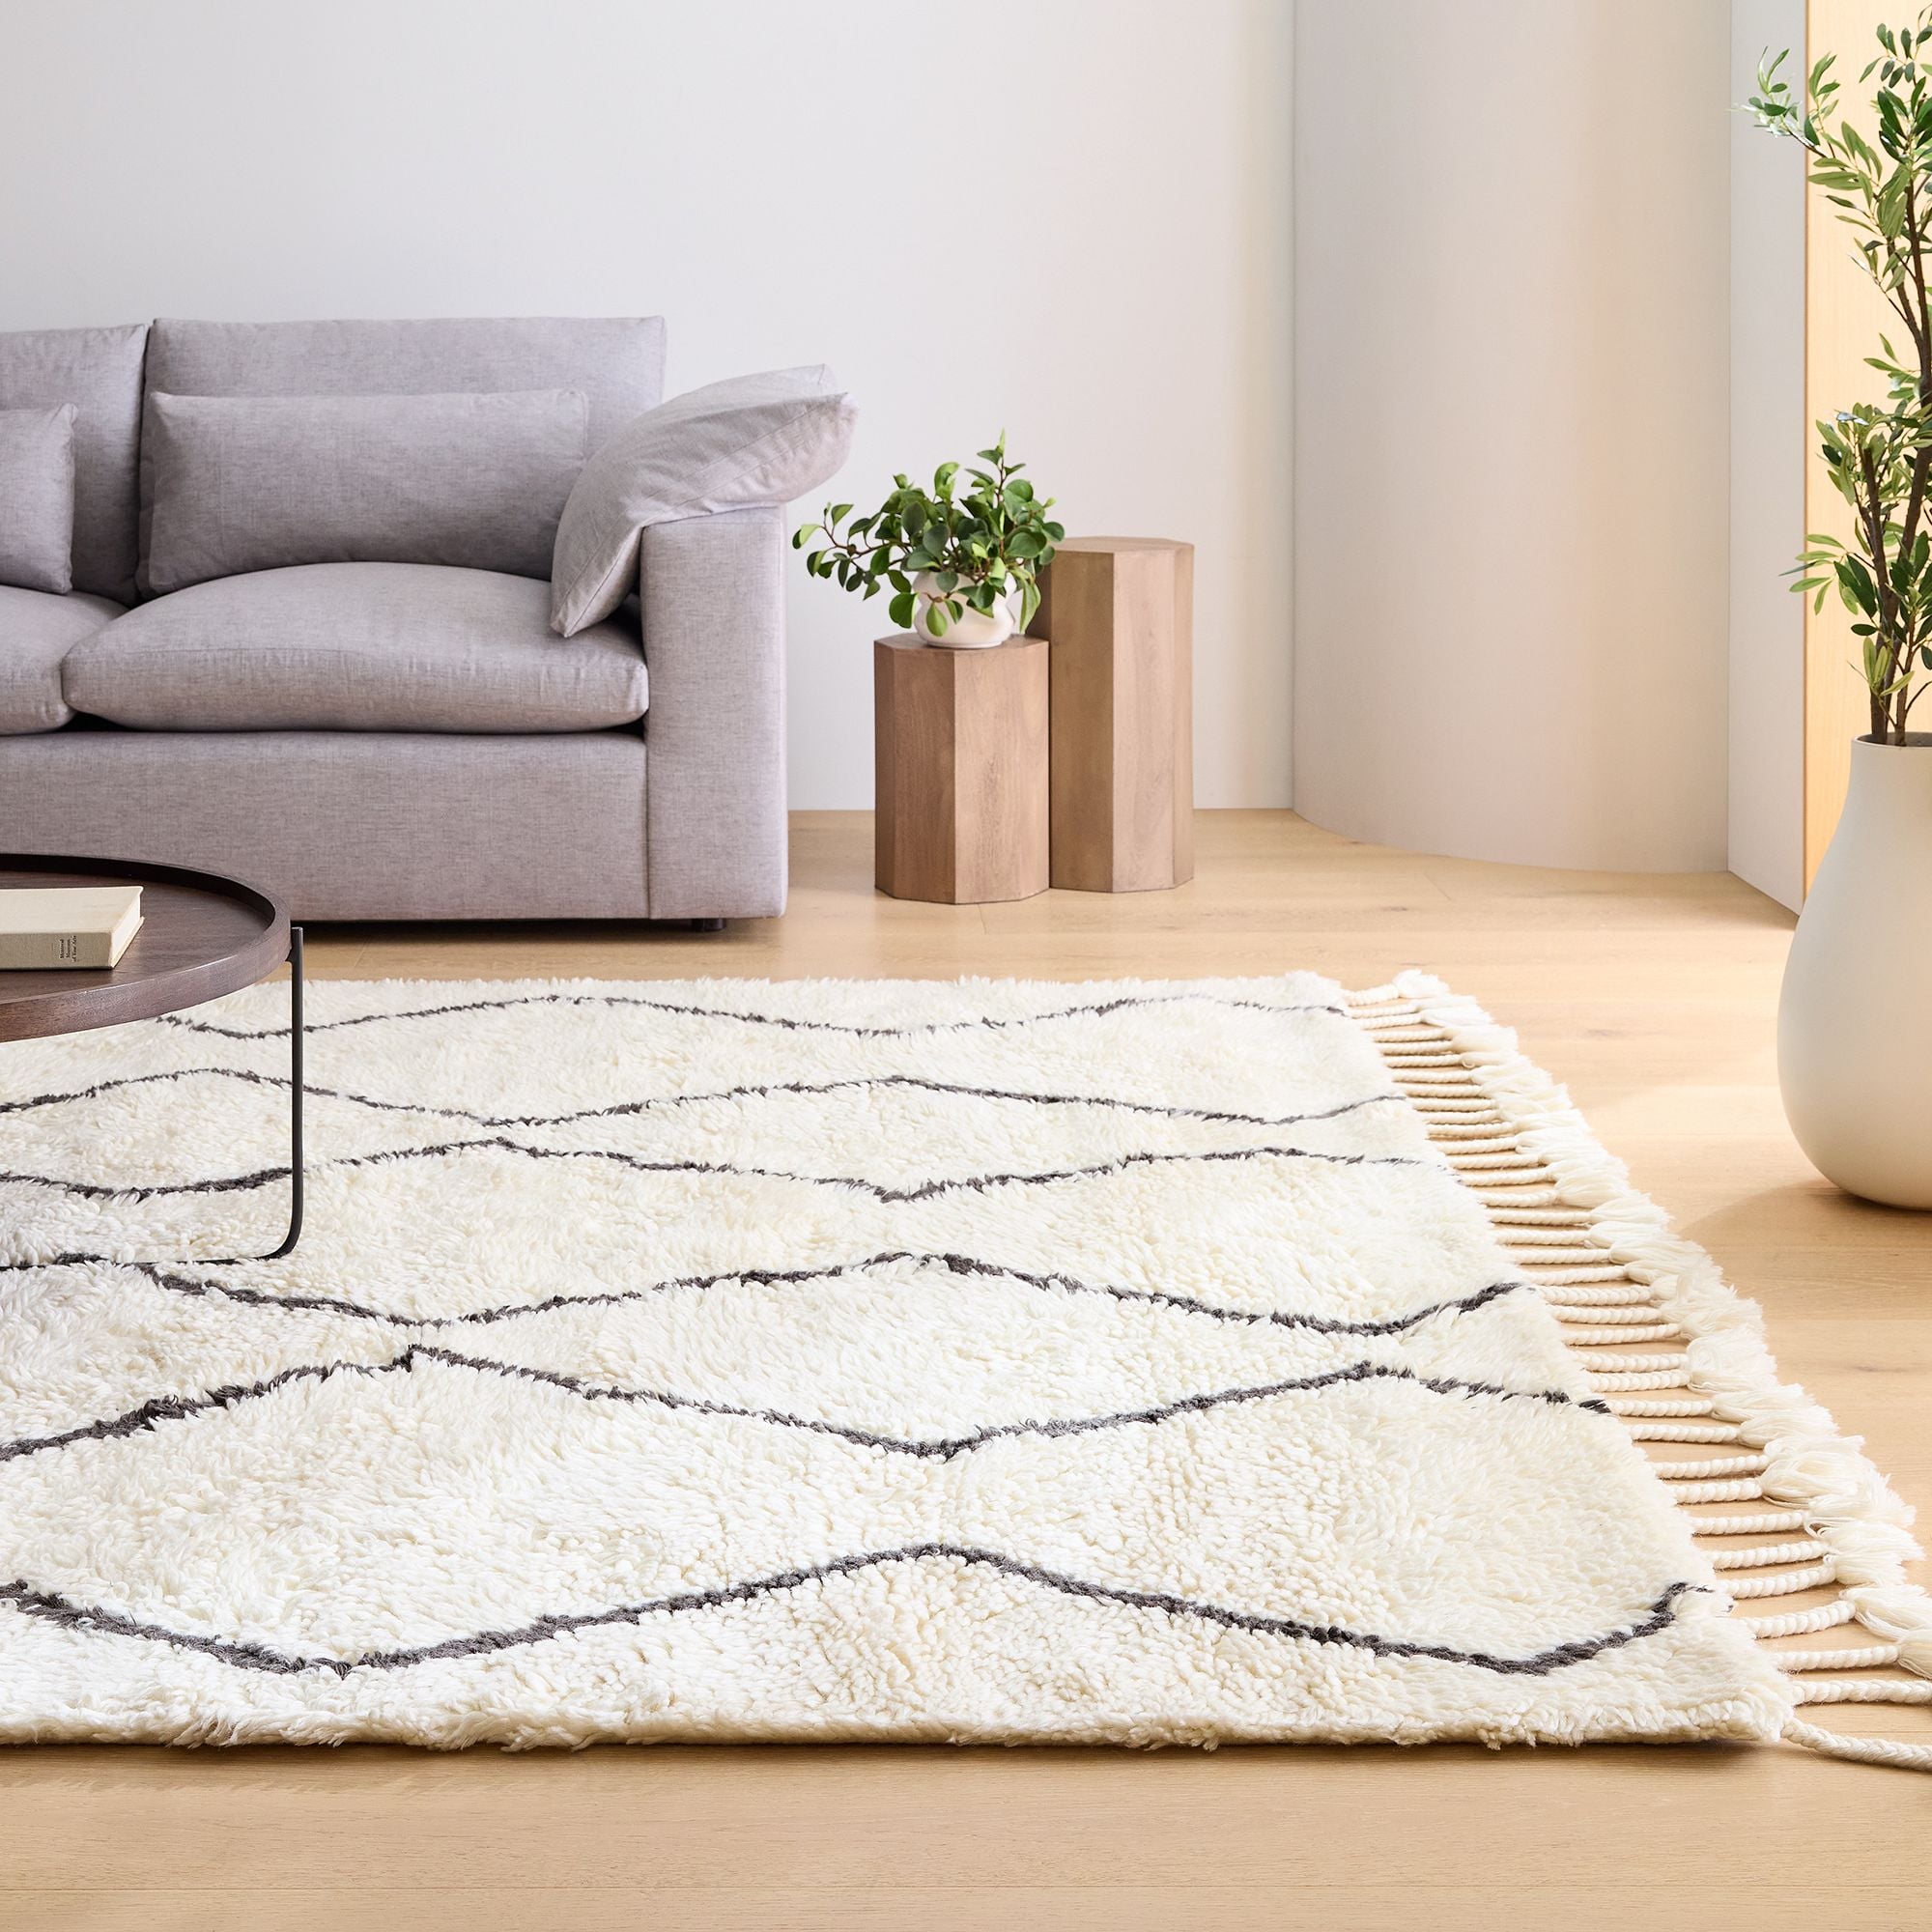 THE BEST (+ WORST) RUGS FOR HIGH TRAFFIC AREAS